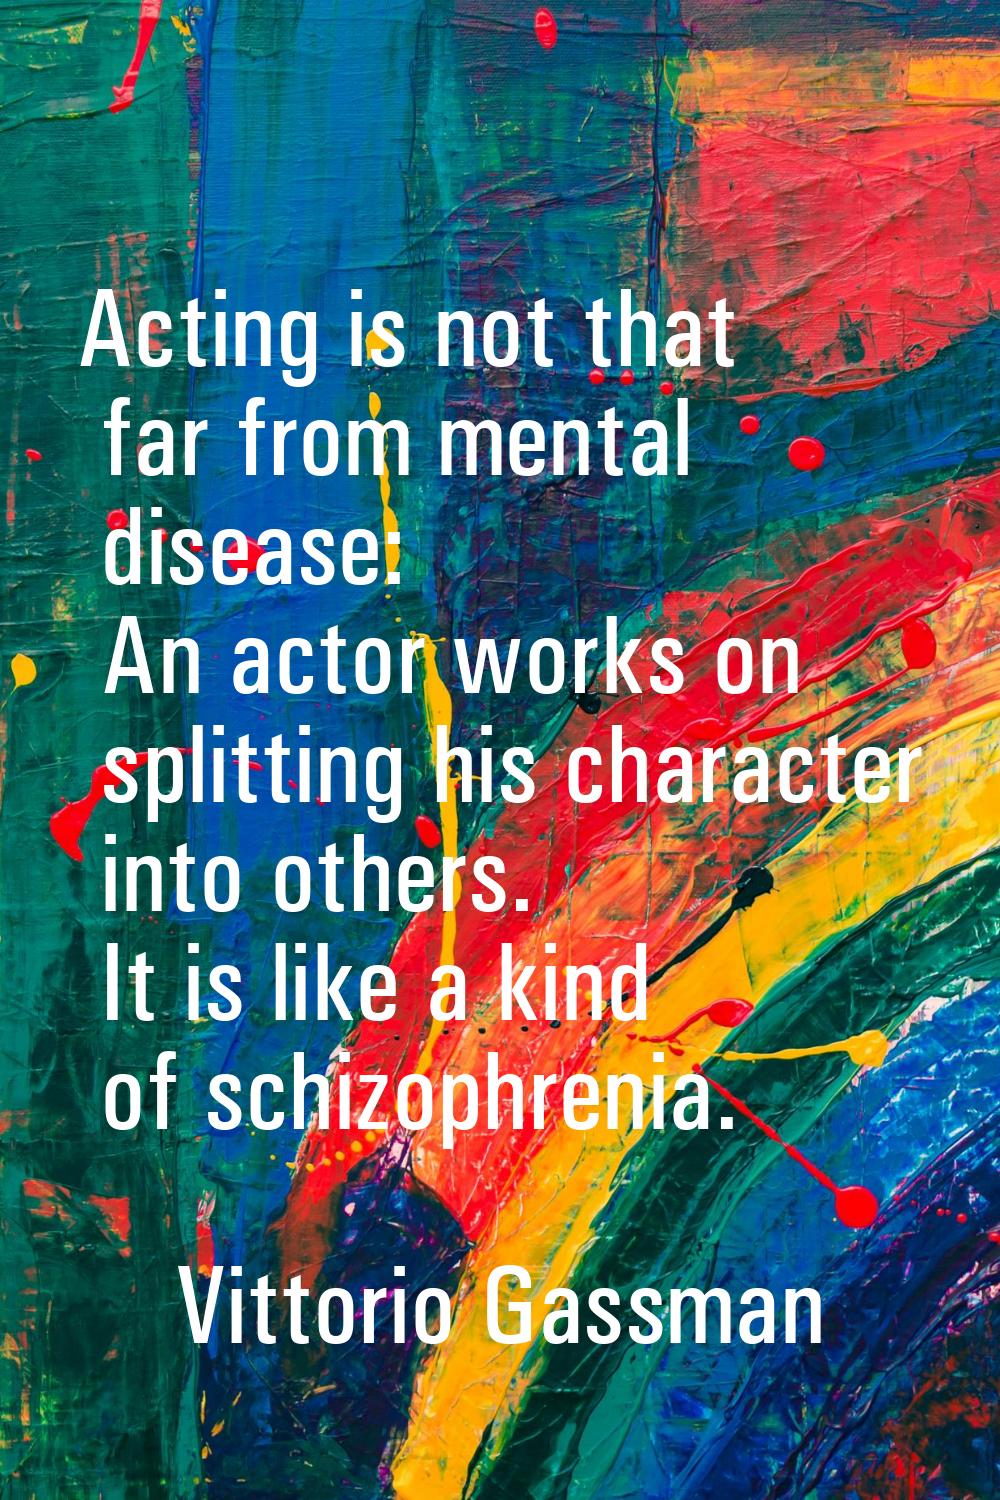 Acting is not that far from mental disease: An actor works on splitting his character into others. 